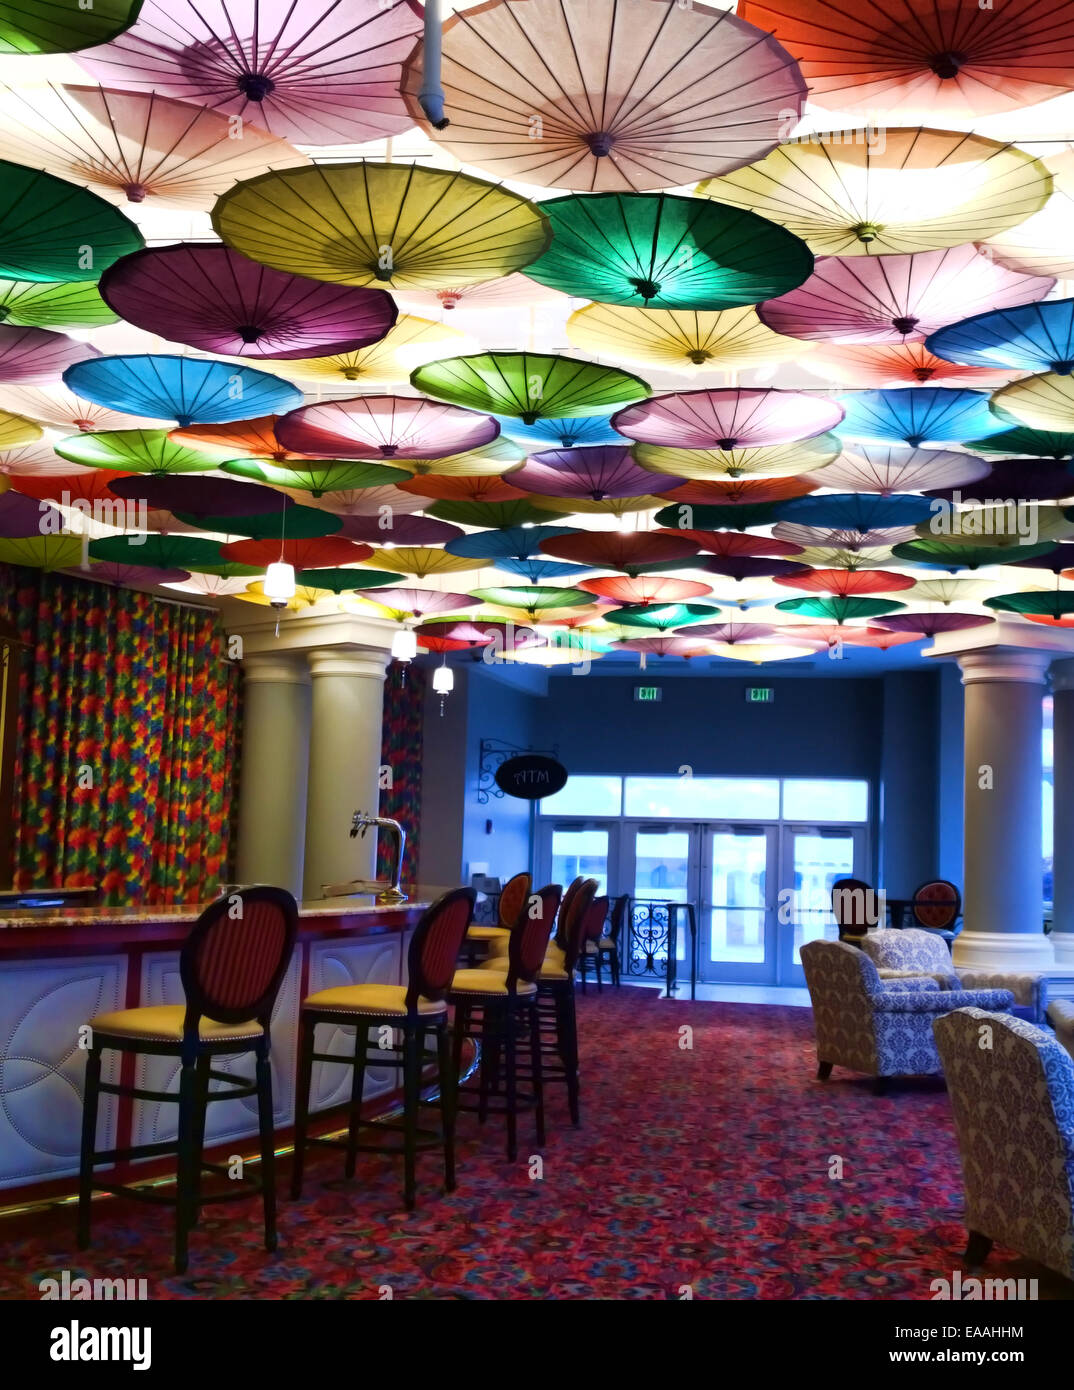 upscale cocktail lounge and bar with umbrella decorations Stock Photo